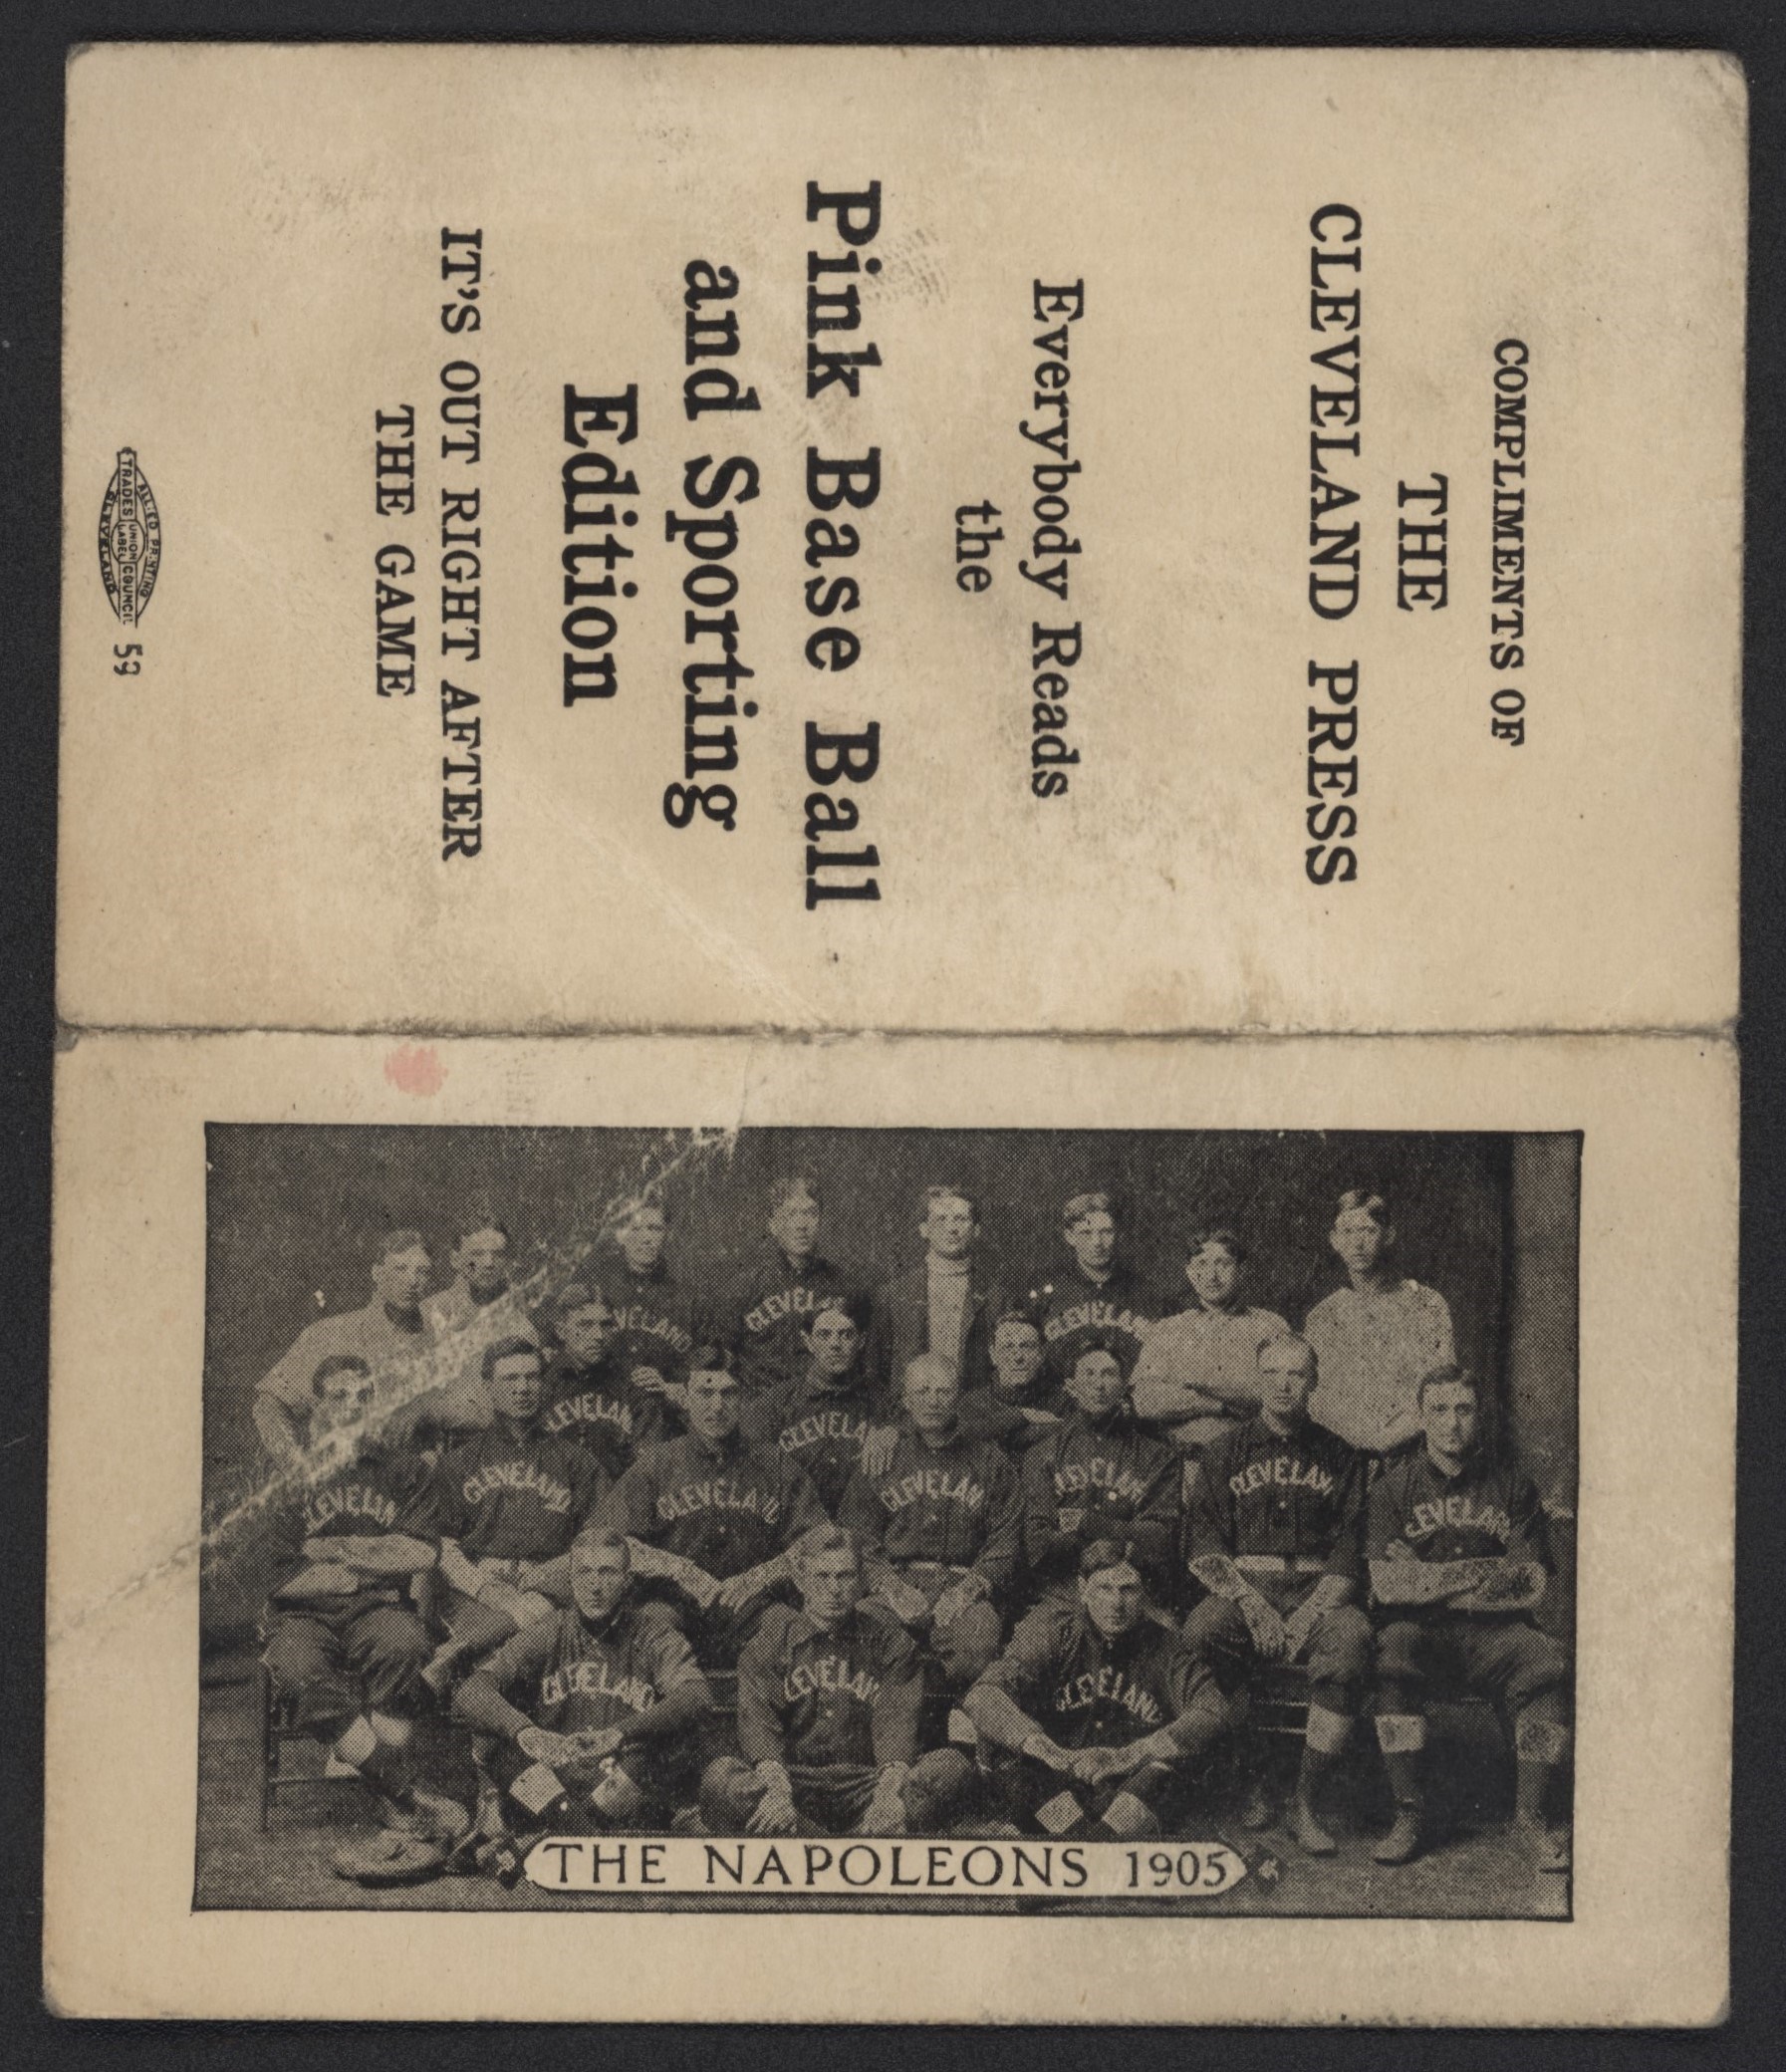 1905 "The Napoleons" Schedule with Lajoie and Joss